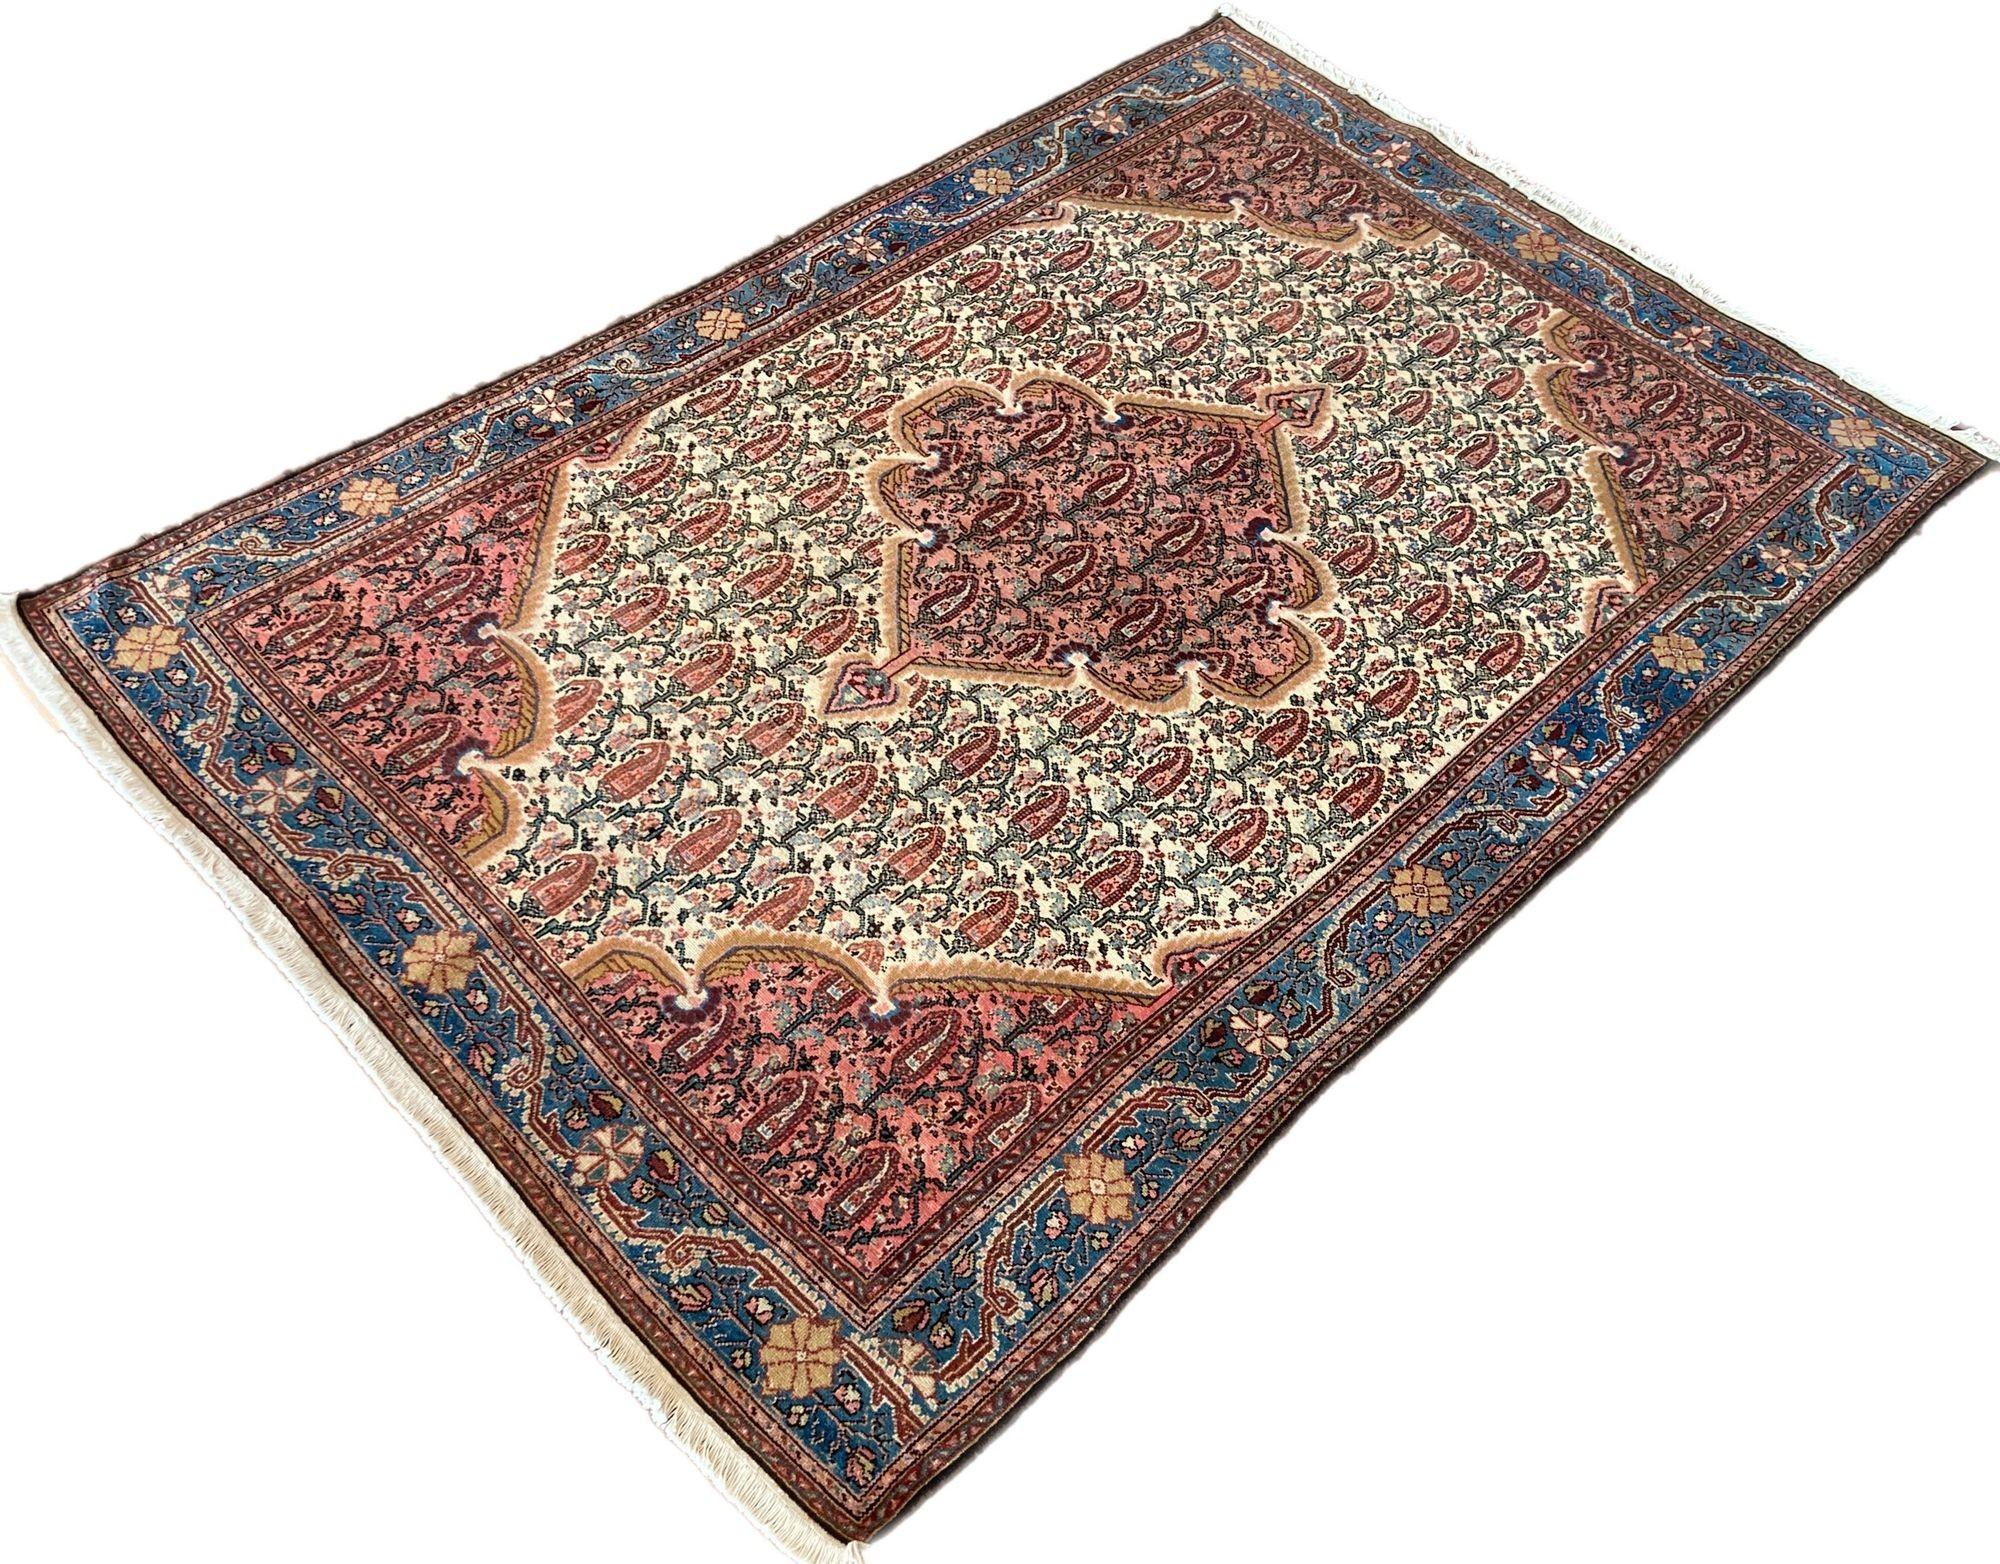 Antique Malayer Rug 1.97m X 1.32m In Good Condition For Sale In St. Albans, GB